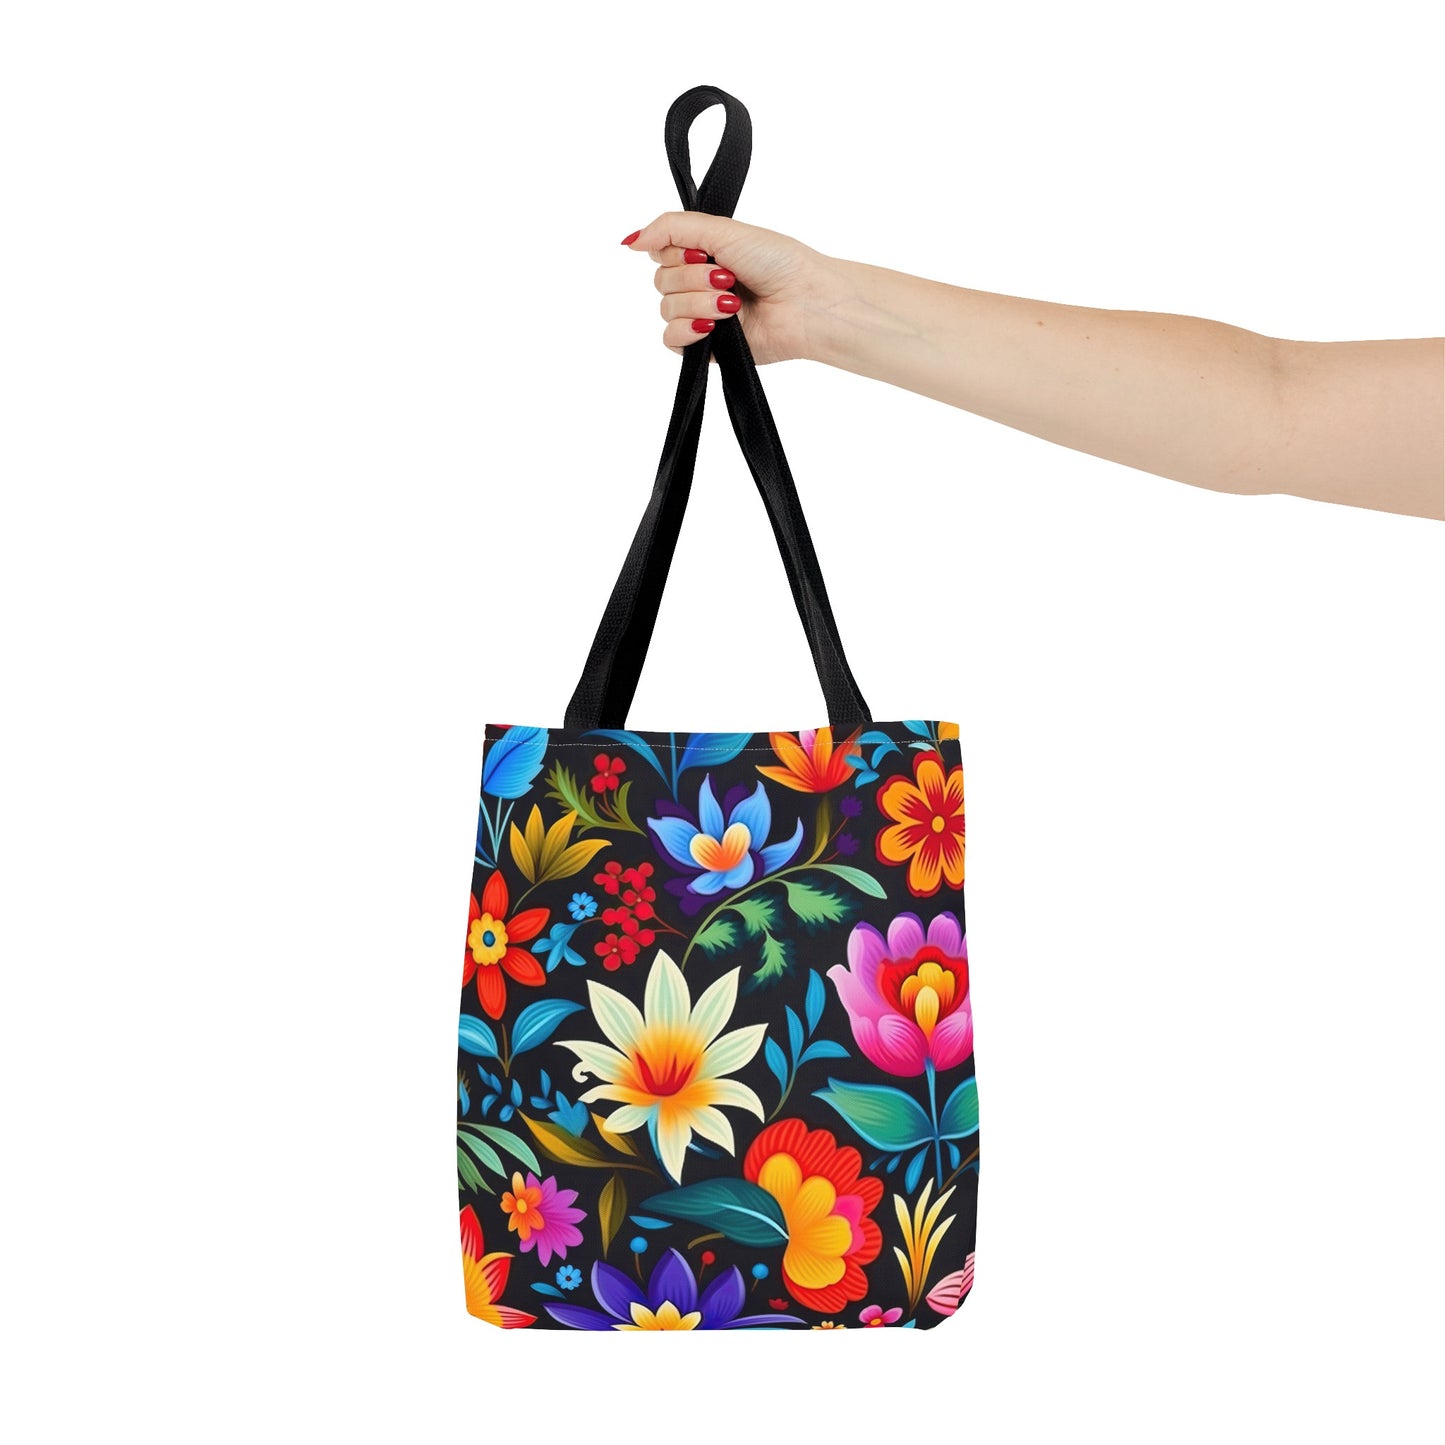 Beautiful Floral Tote Bag Available in Three Sizes